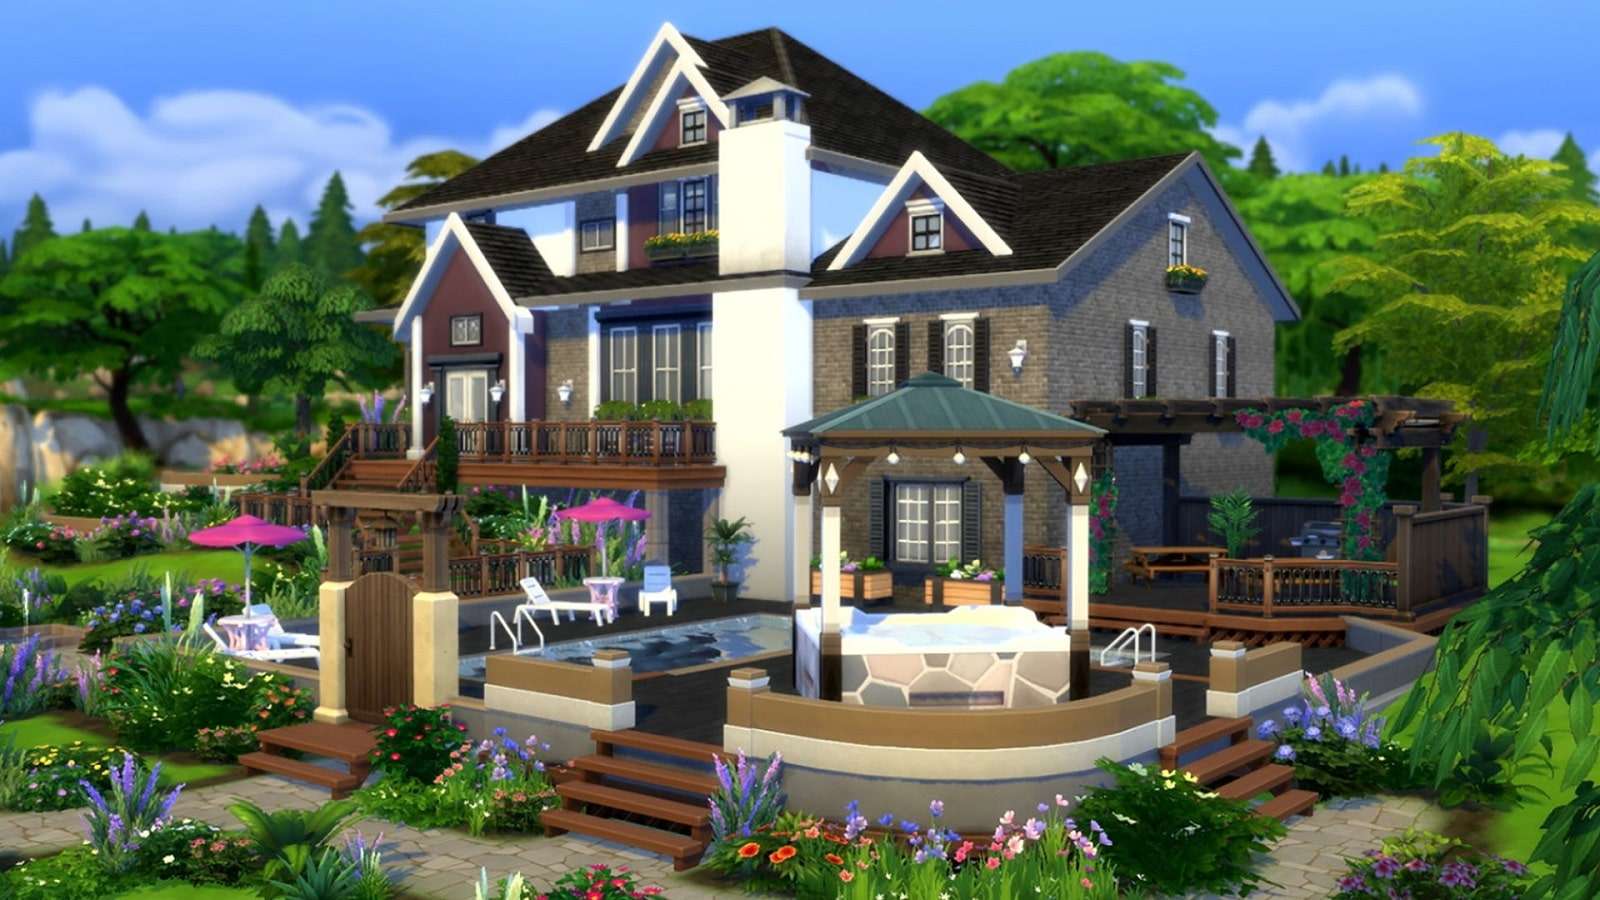 The Sims 4 house